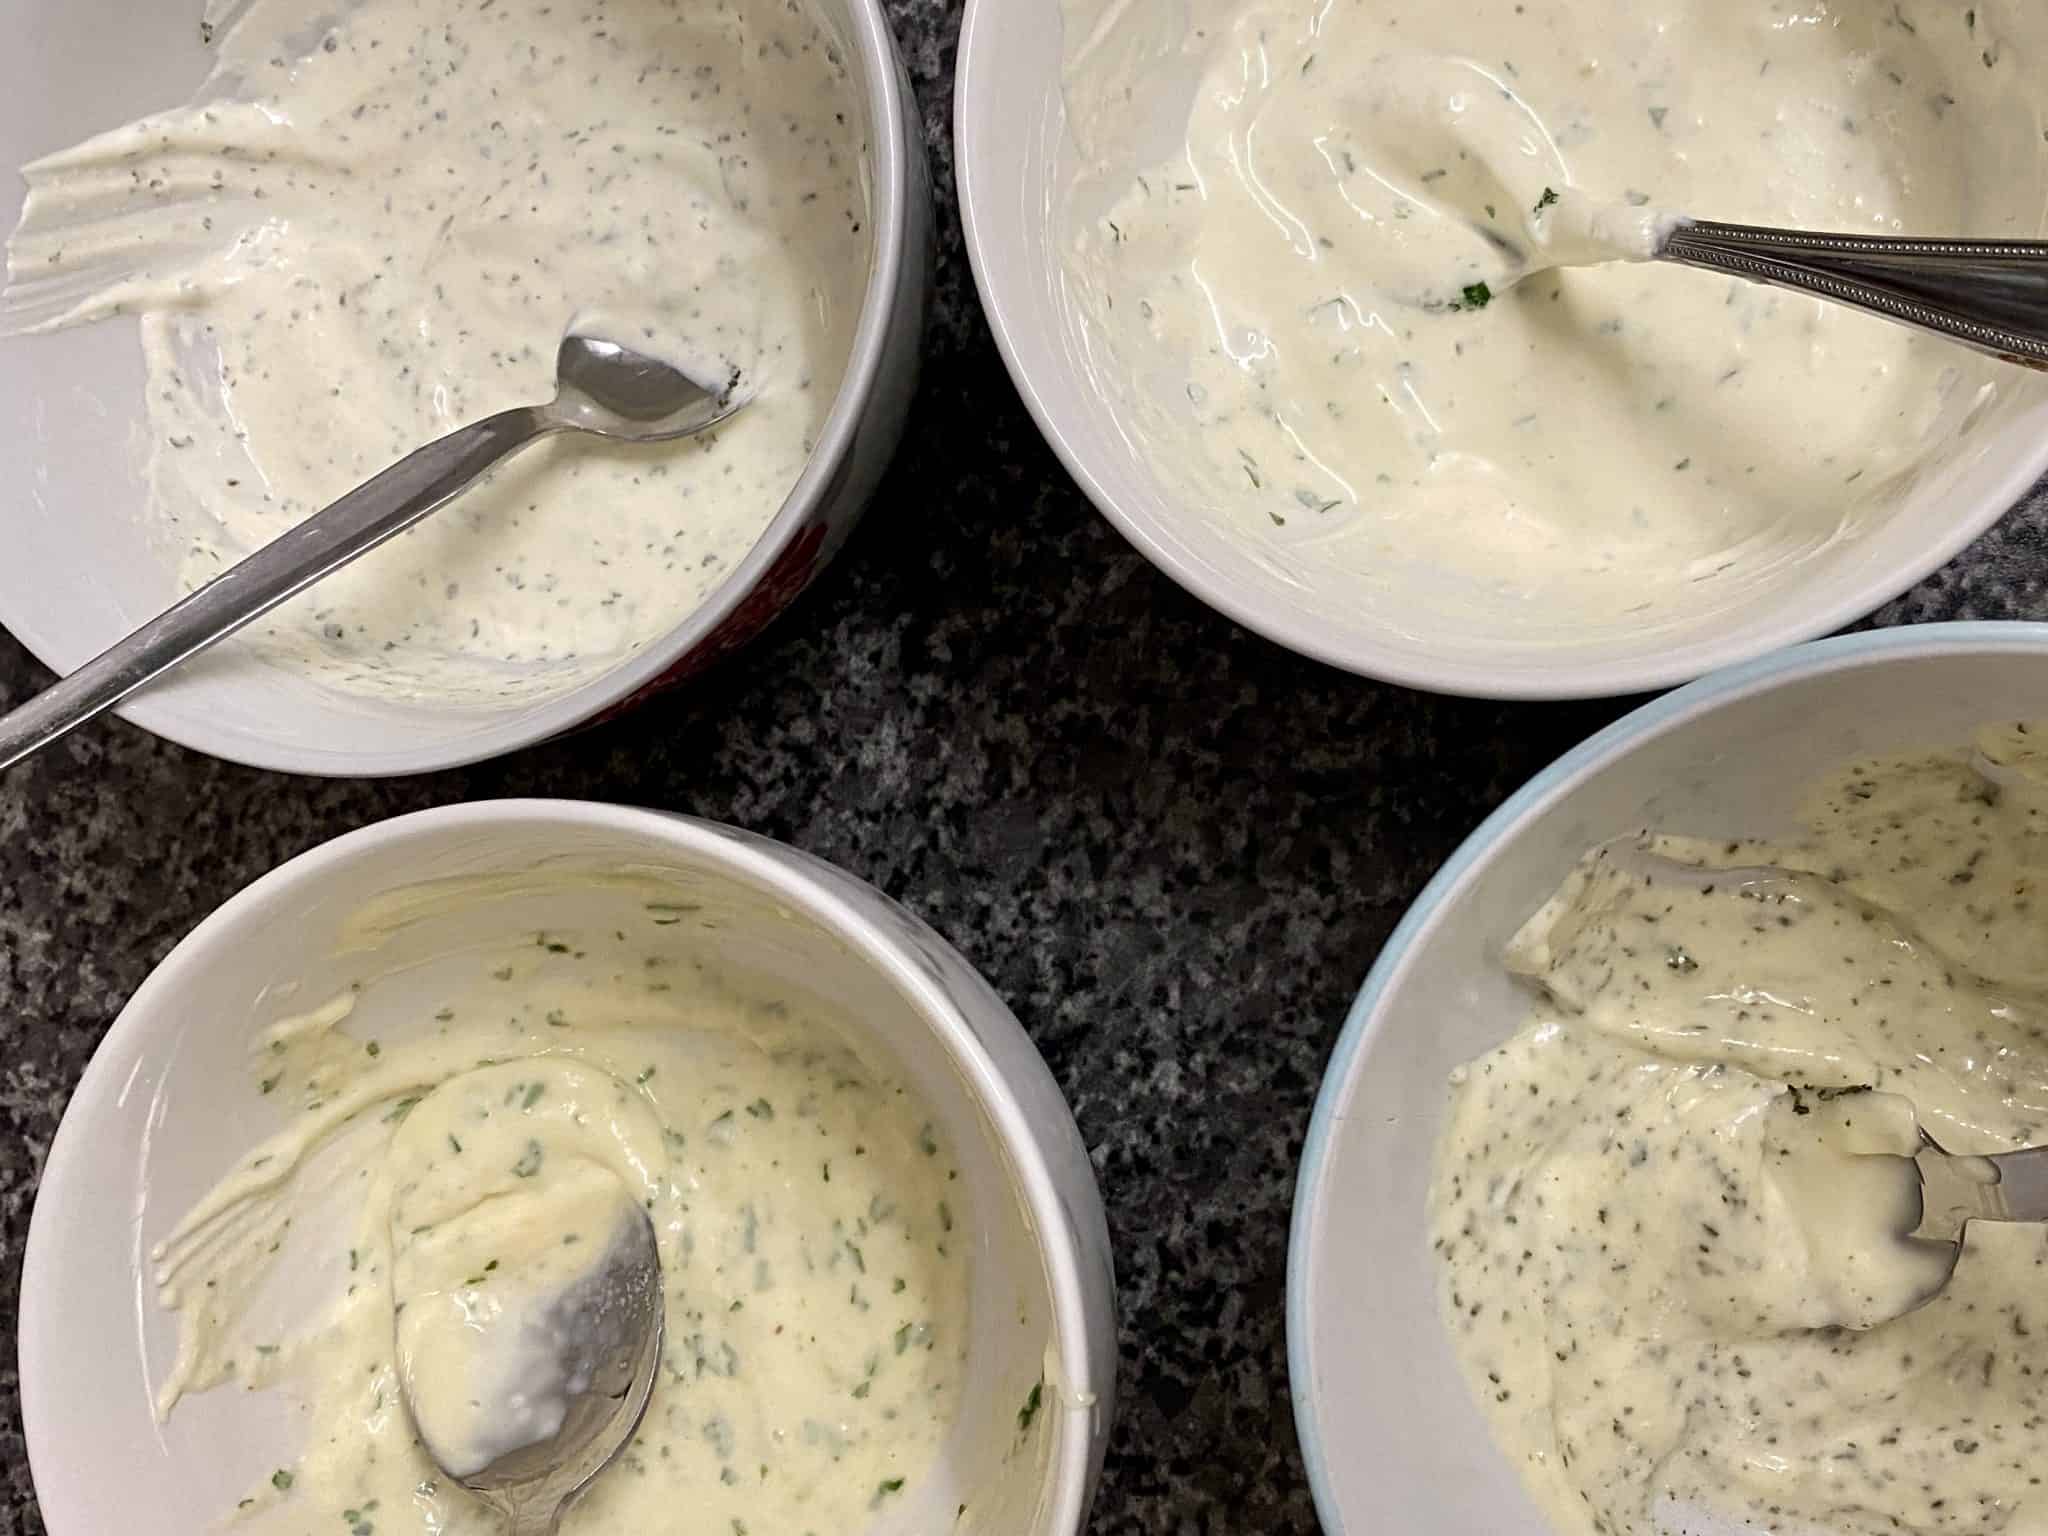 Domino's Garlic and Herb Dip Recipe Test by Jonathan Hatchman